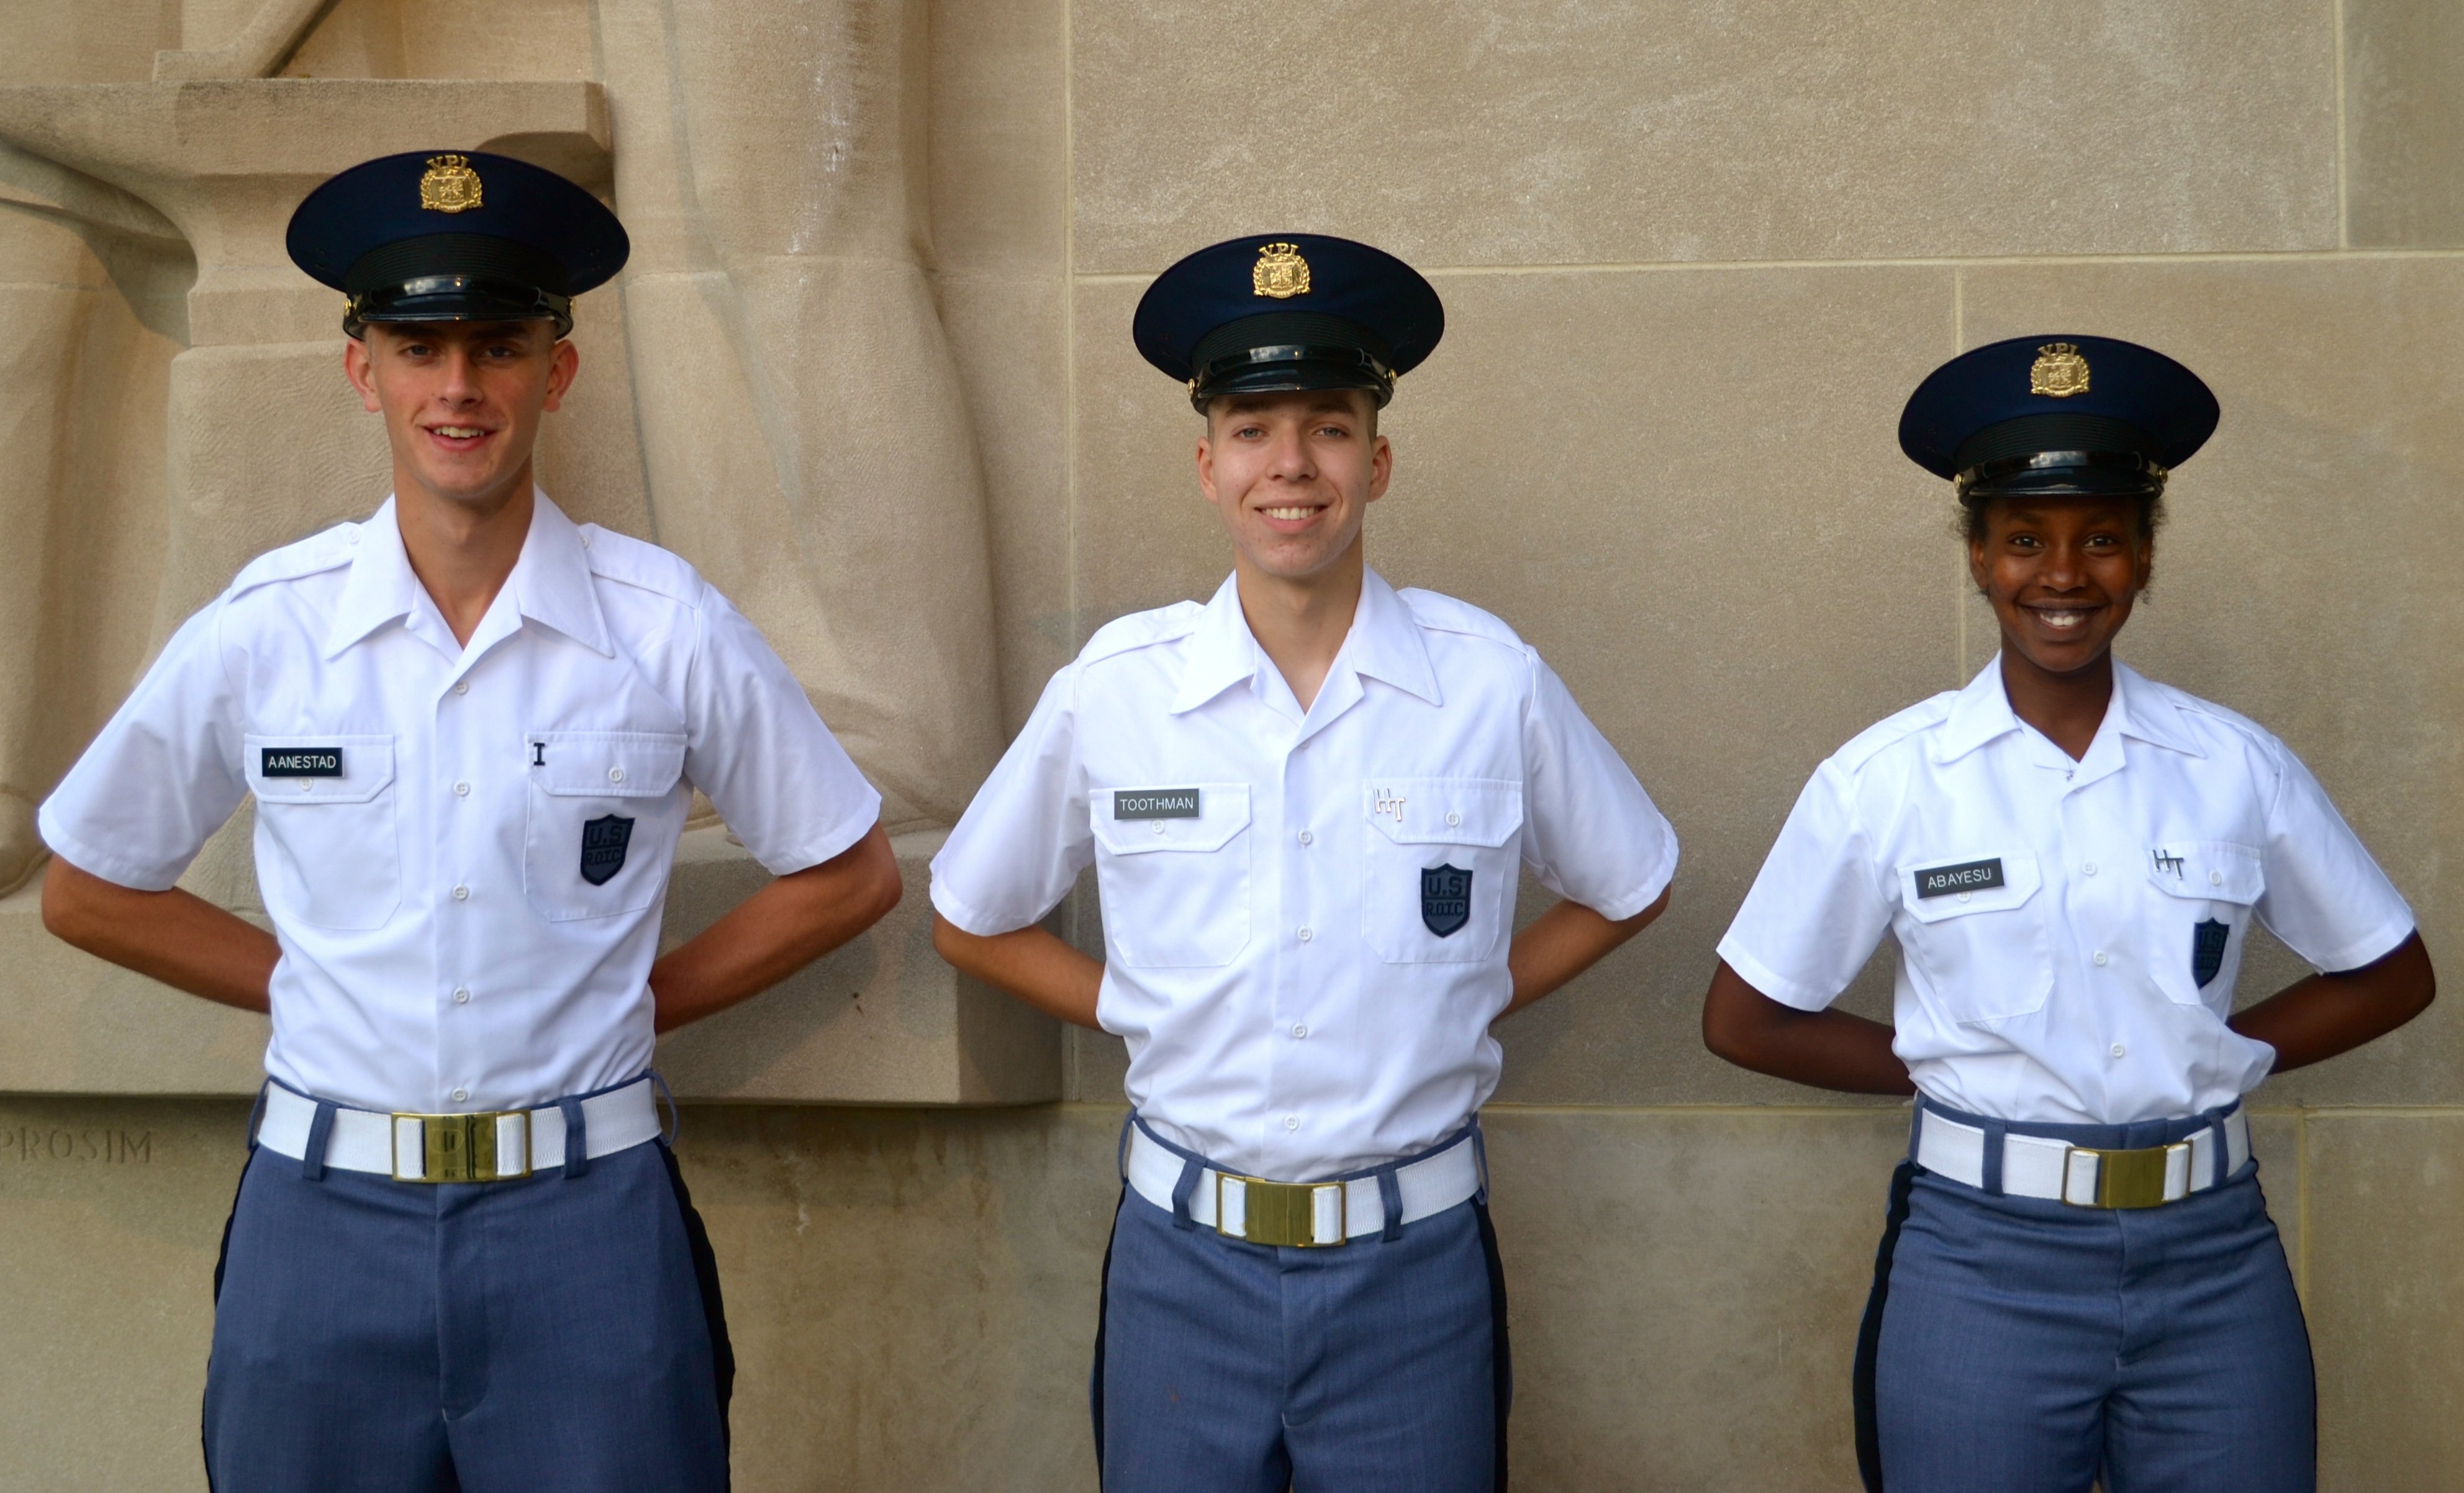 From left to right are Cadets Paul Aanestad, Zachary Toothman, and Precious Abayesu standing in front of the Pylons.